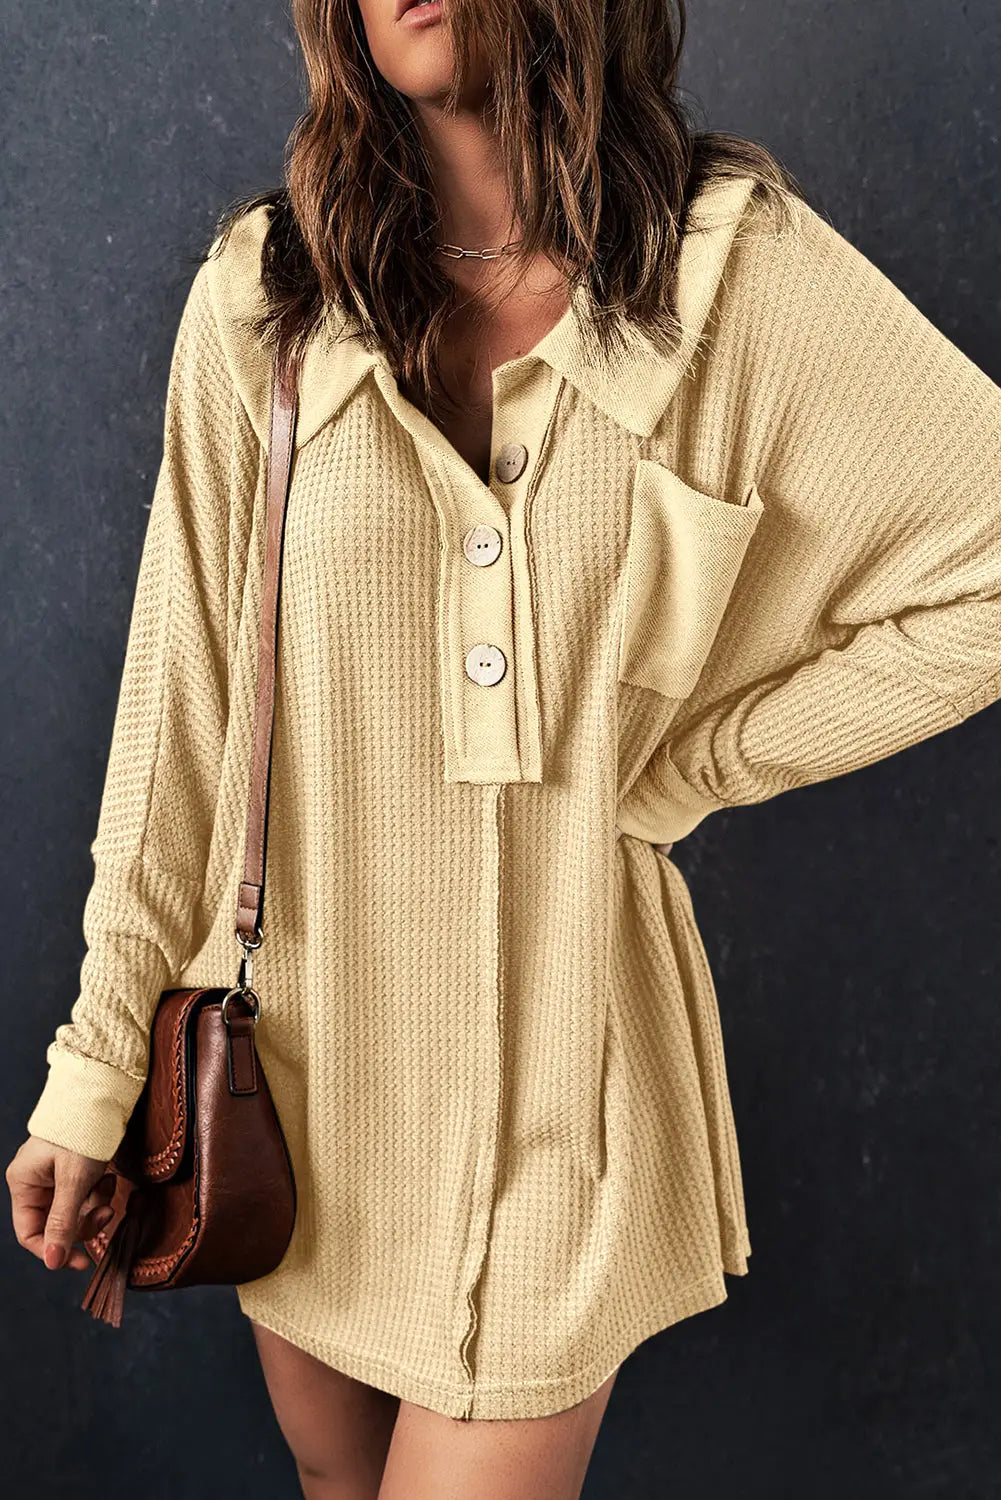 Apricot waffle knit buttoned long sleeve top - tops